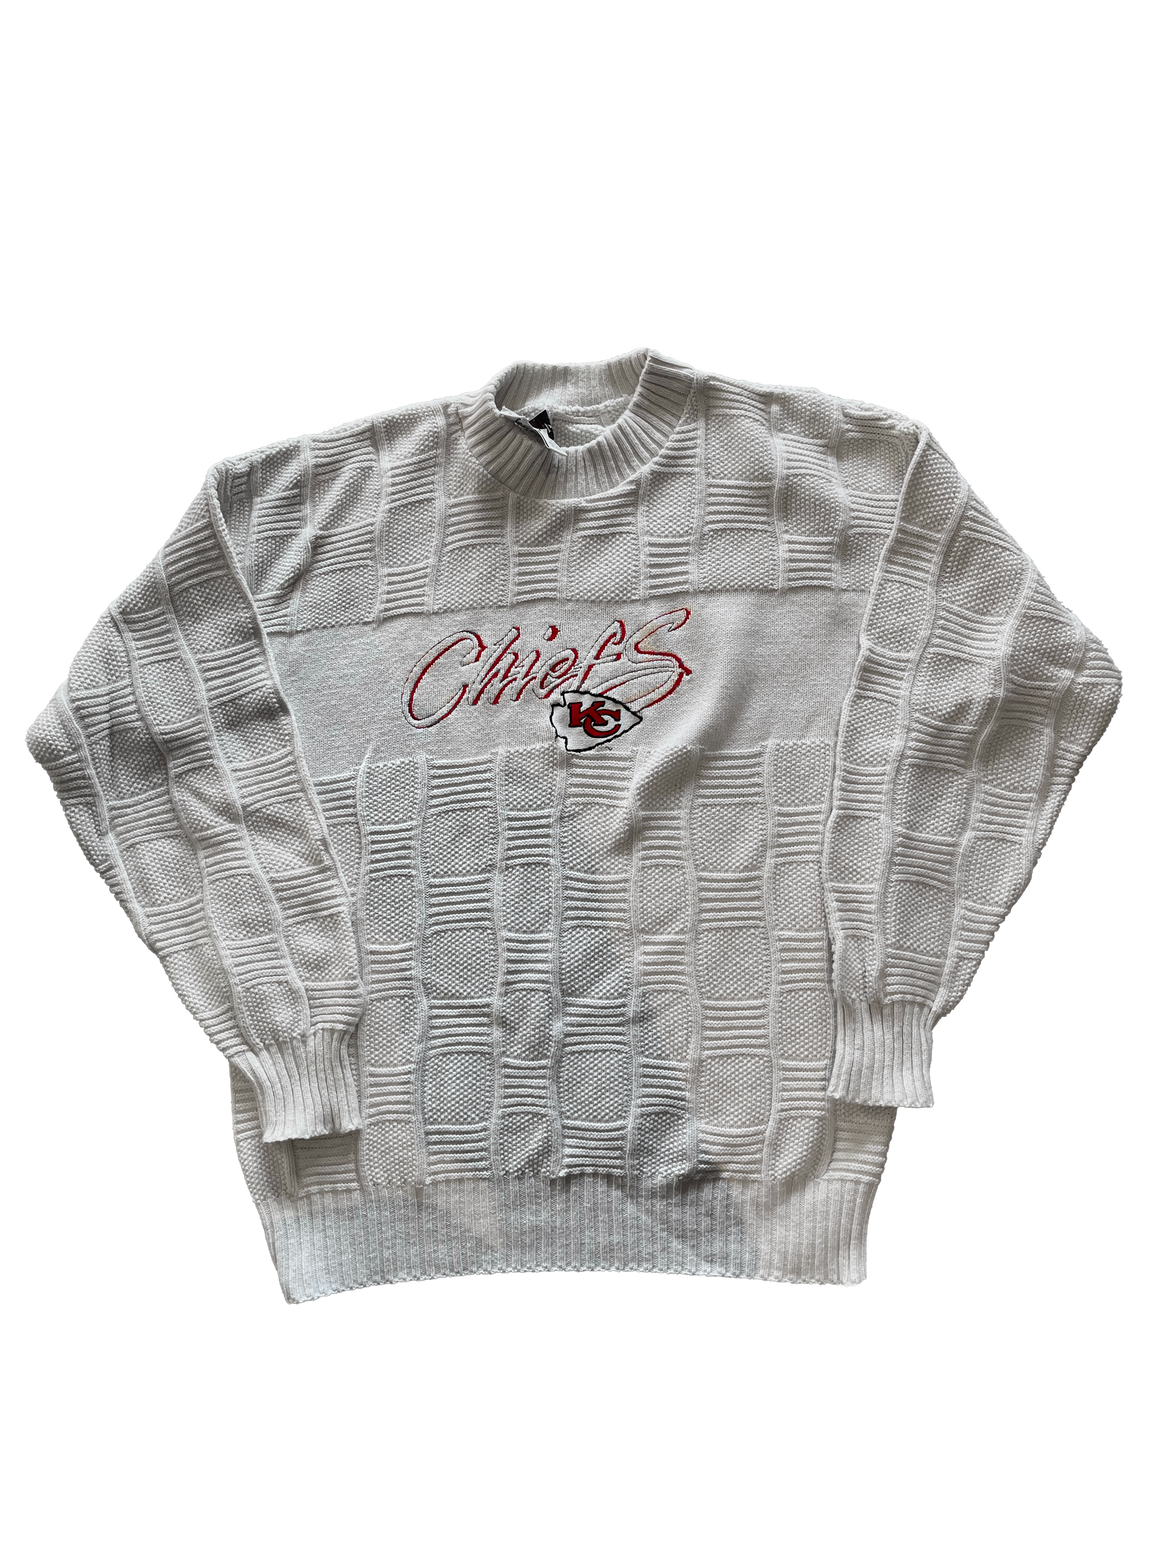 WESTSIDE STOREY VINTAGE | VINTAGE 90S CABLE KNIT CHIEFS SWEATER